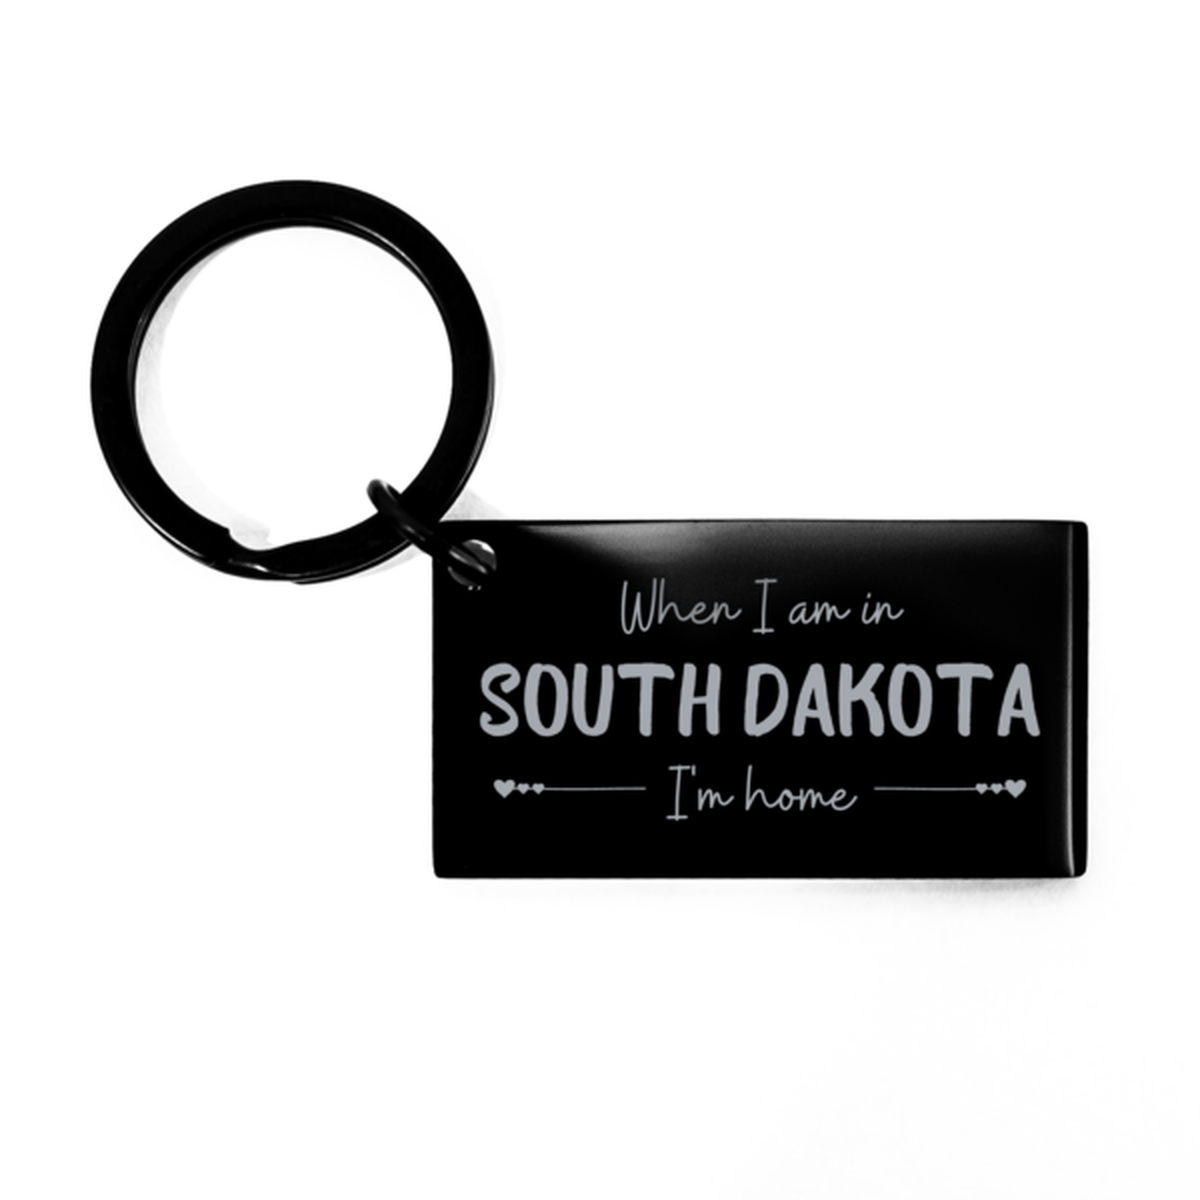 When I am in South Dakota I'm home Keychain, Cheap Gifts For South Dakota, State South Dakota Birthday Gifts for Friends Coworker